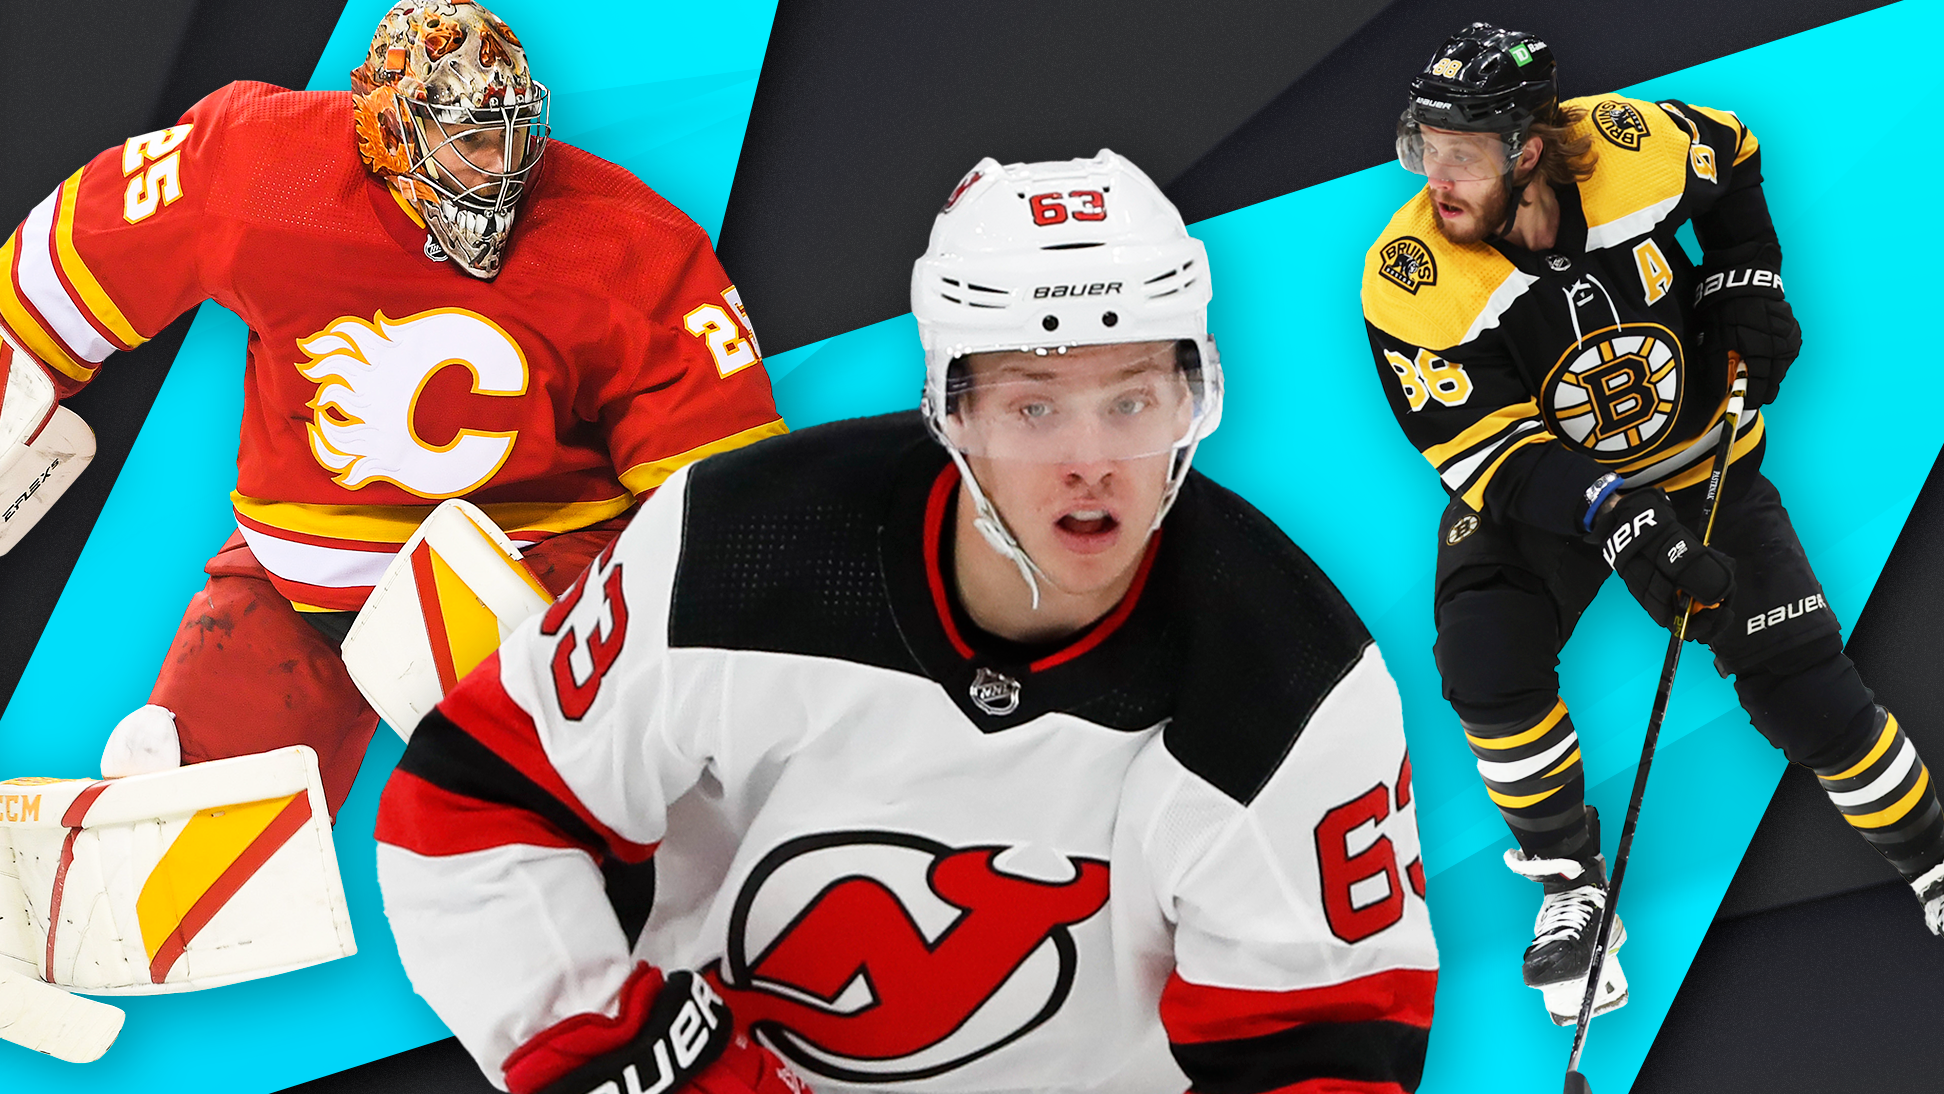 NHL jersey power rankings: Original Six teams are tough to beat